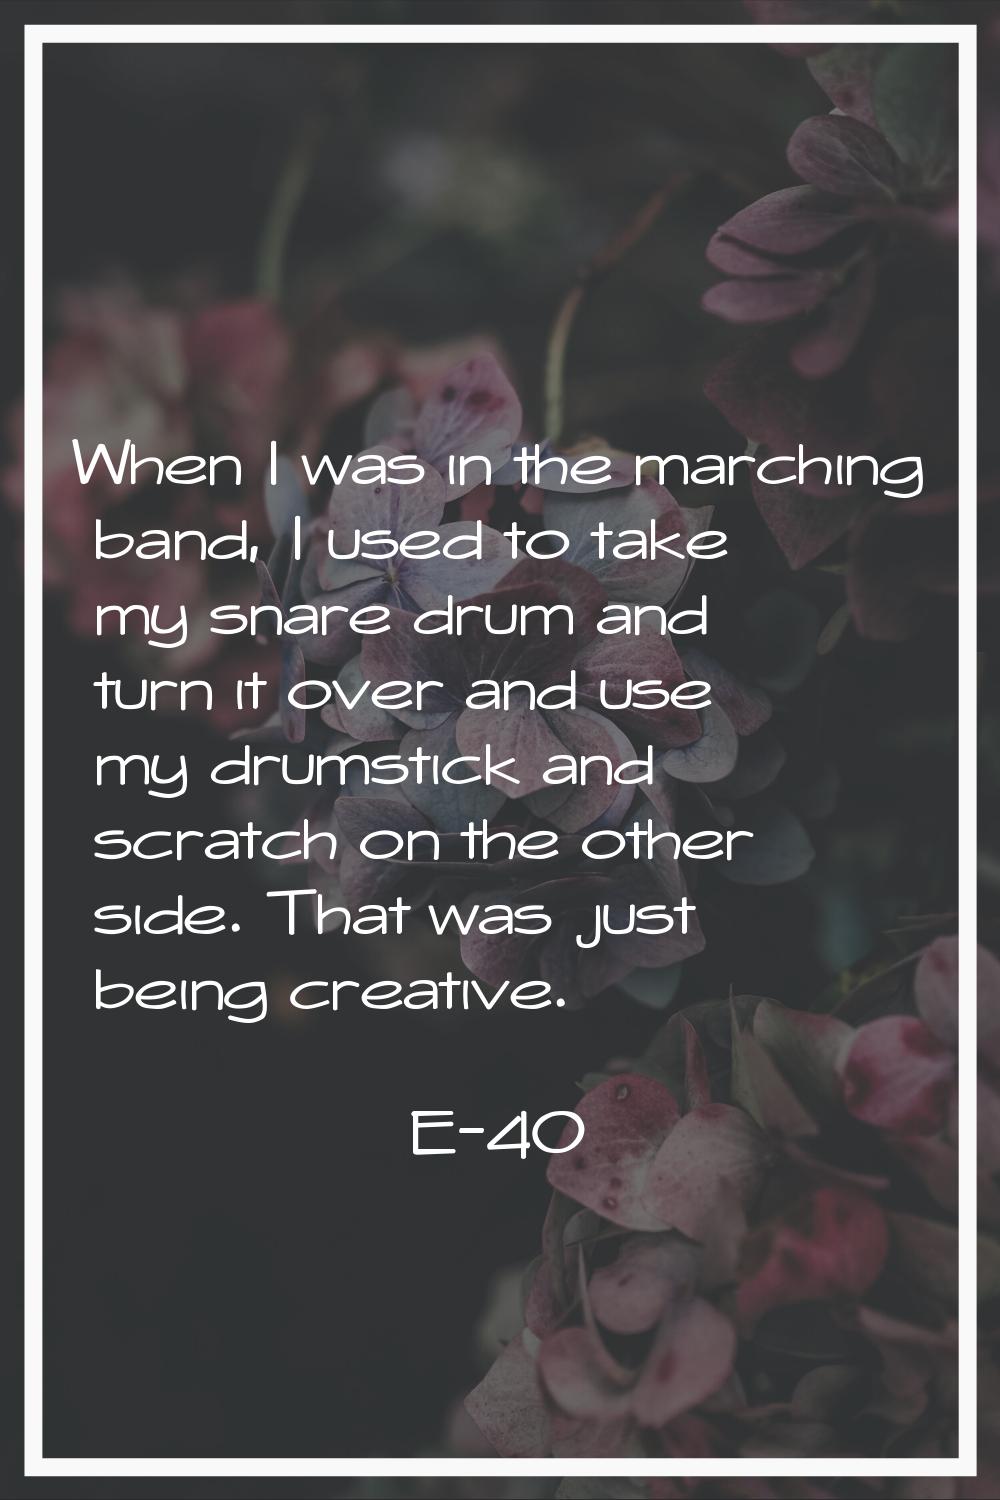 When I was in the marching band, I used to take my snare drum and turn it over and use my drumstick